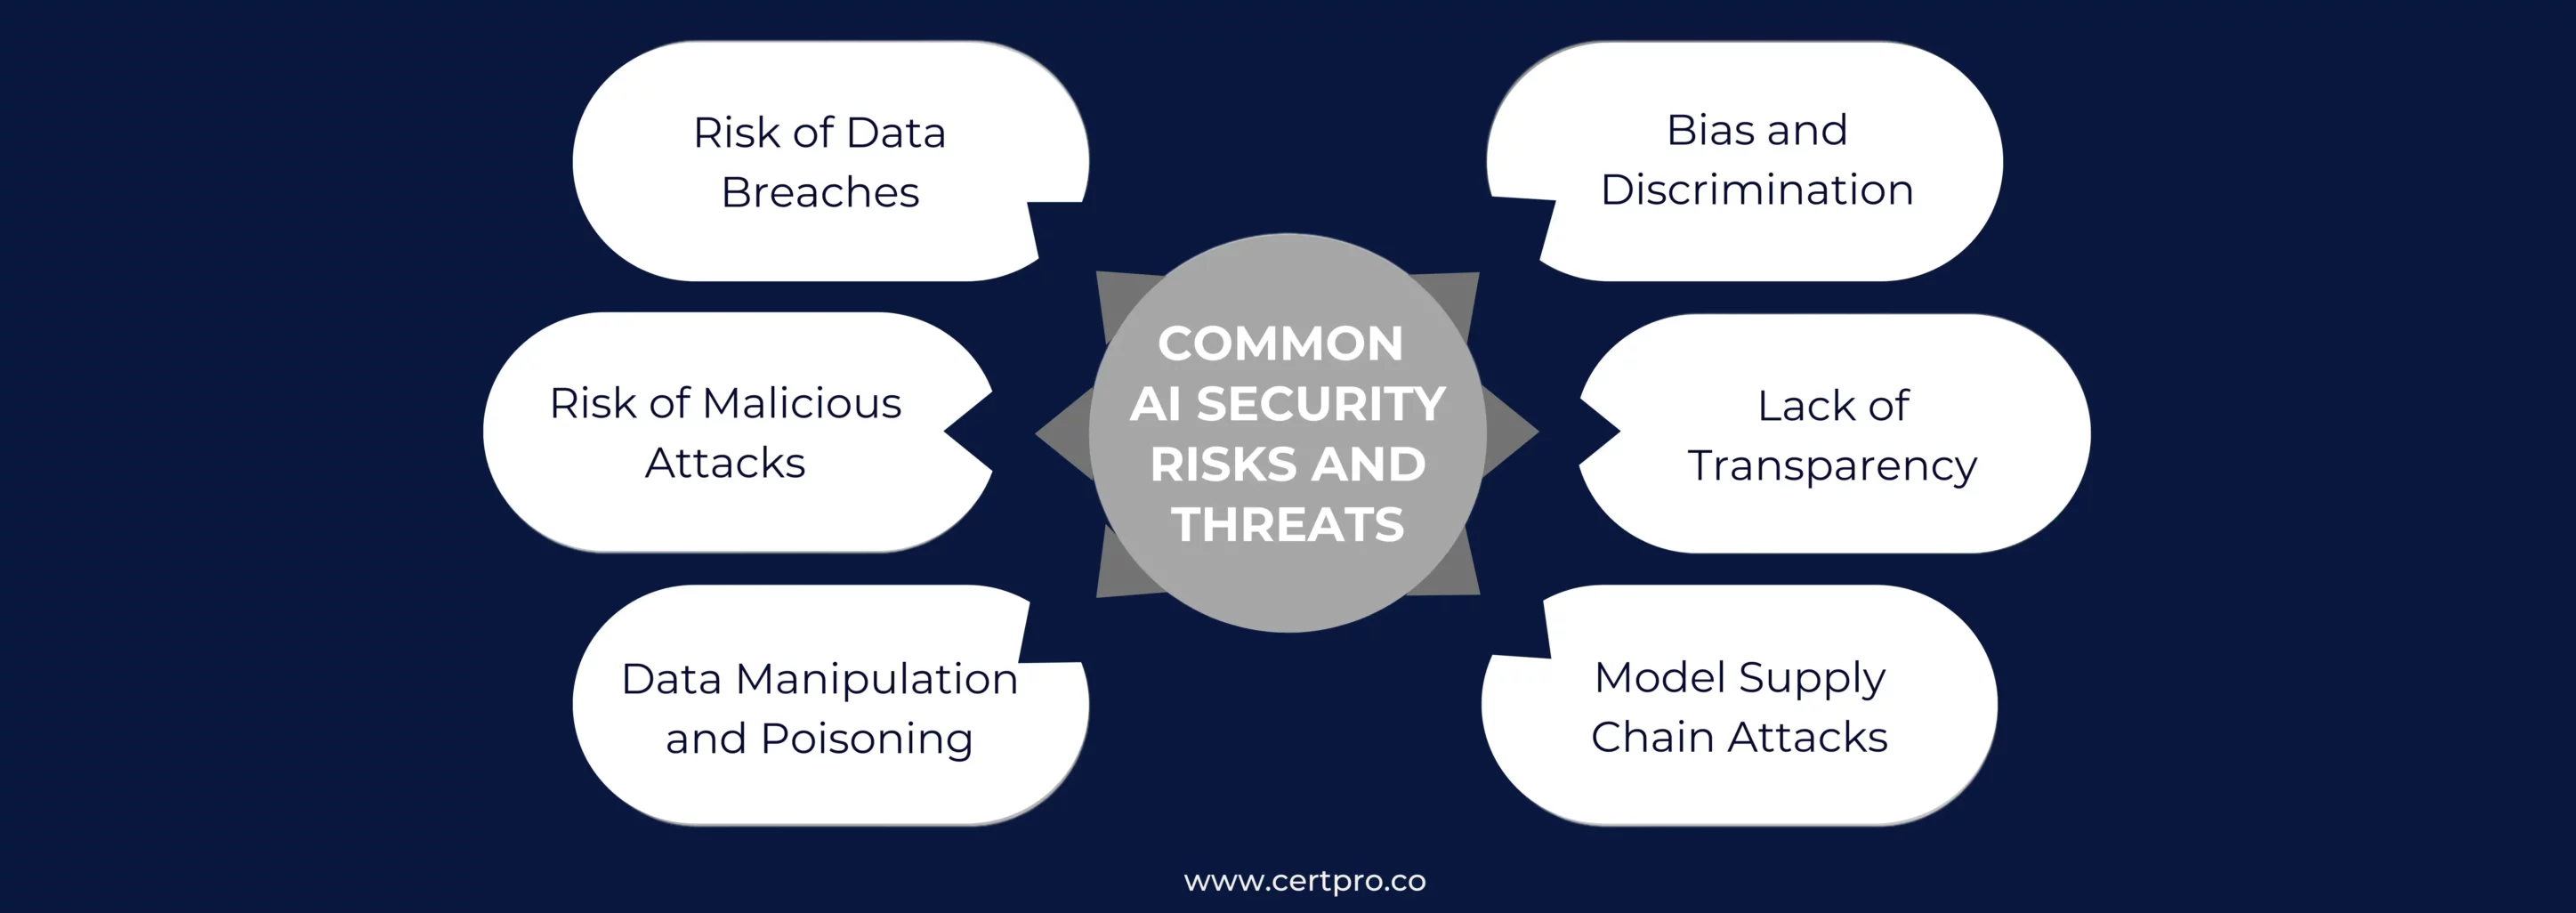 COMMON AI SECURITY RISKS AND THREATs